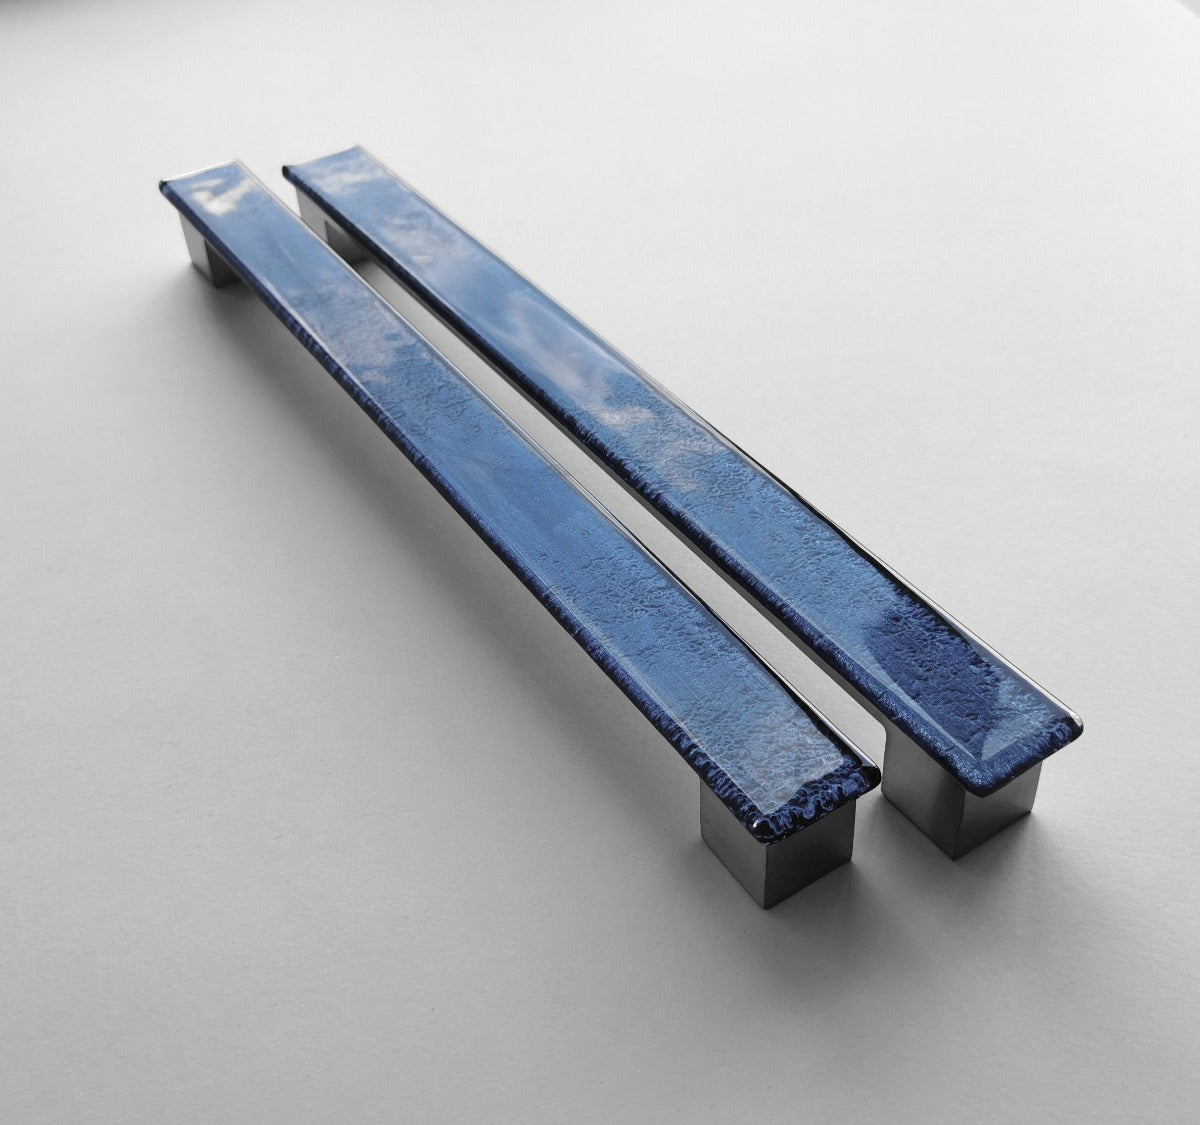 A Set of 2 Large Glass Pulls in Indigo Blue. Artistic Indigo Blue Furniture Glass Pull - 0039